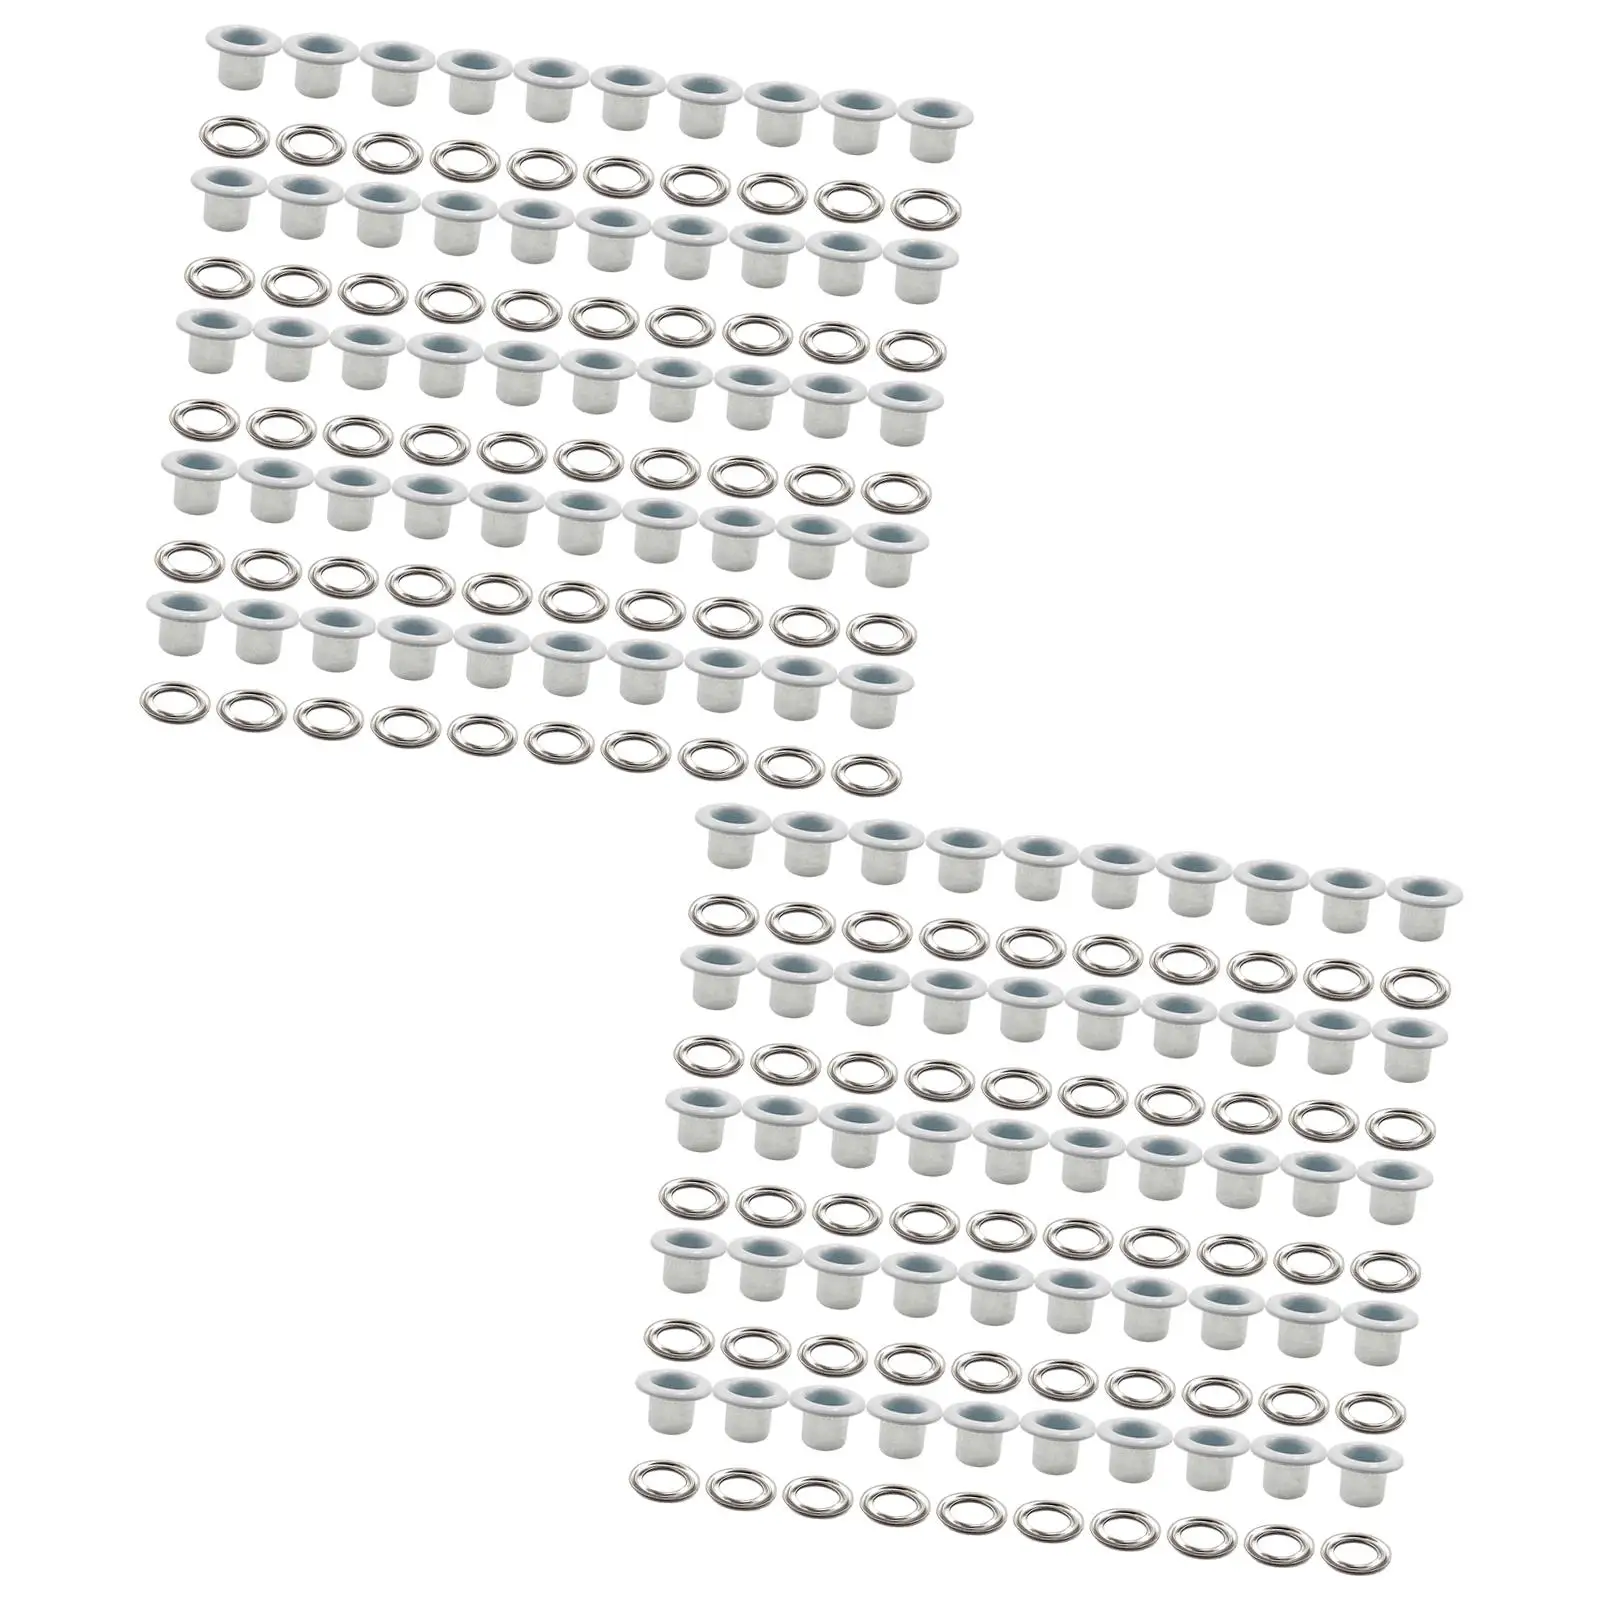 100x Hole Metal Eyelets Grommets 6mm Multipurpose Heavy Duty Round Shape for Leather Curtains Scrapbooking Clothing Card Making